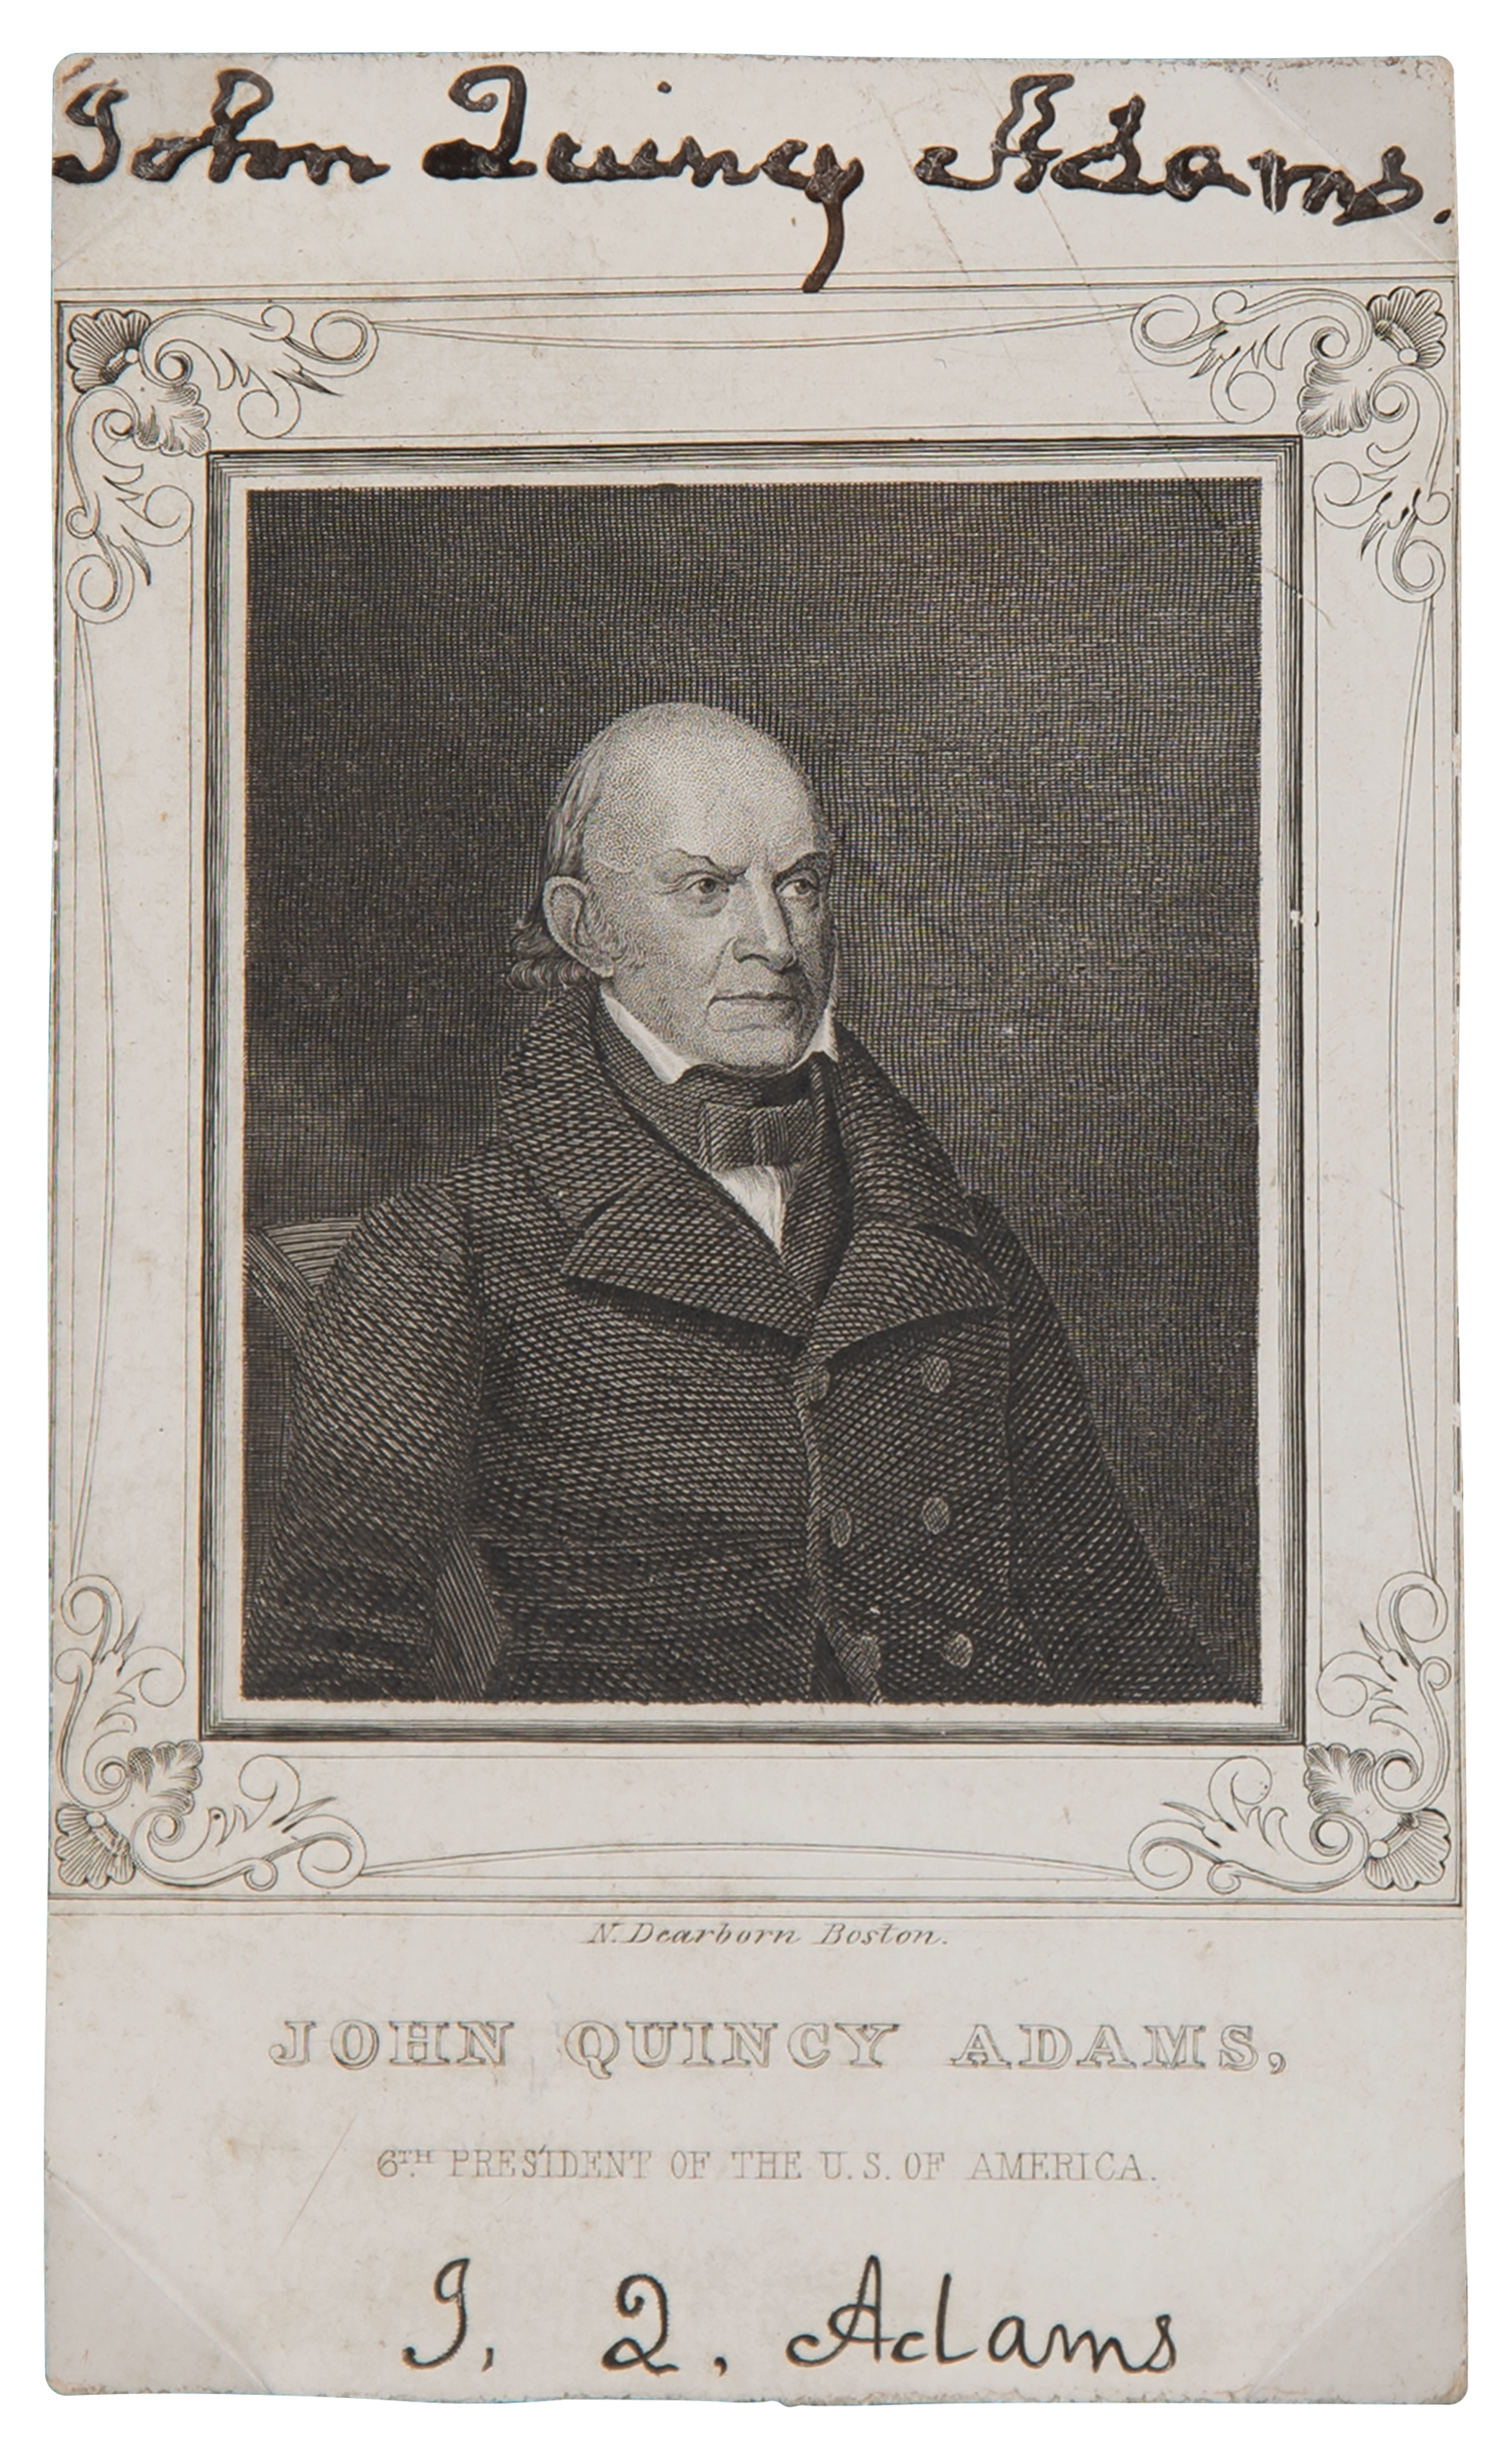 Lot #4 John Quincy Adams Signed Engraving by Nathaniel Dearborn - the earliest known signed image of any president - Image 1